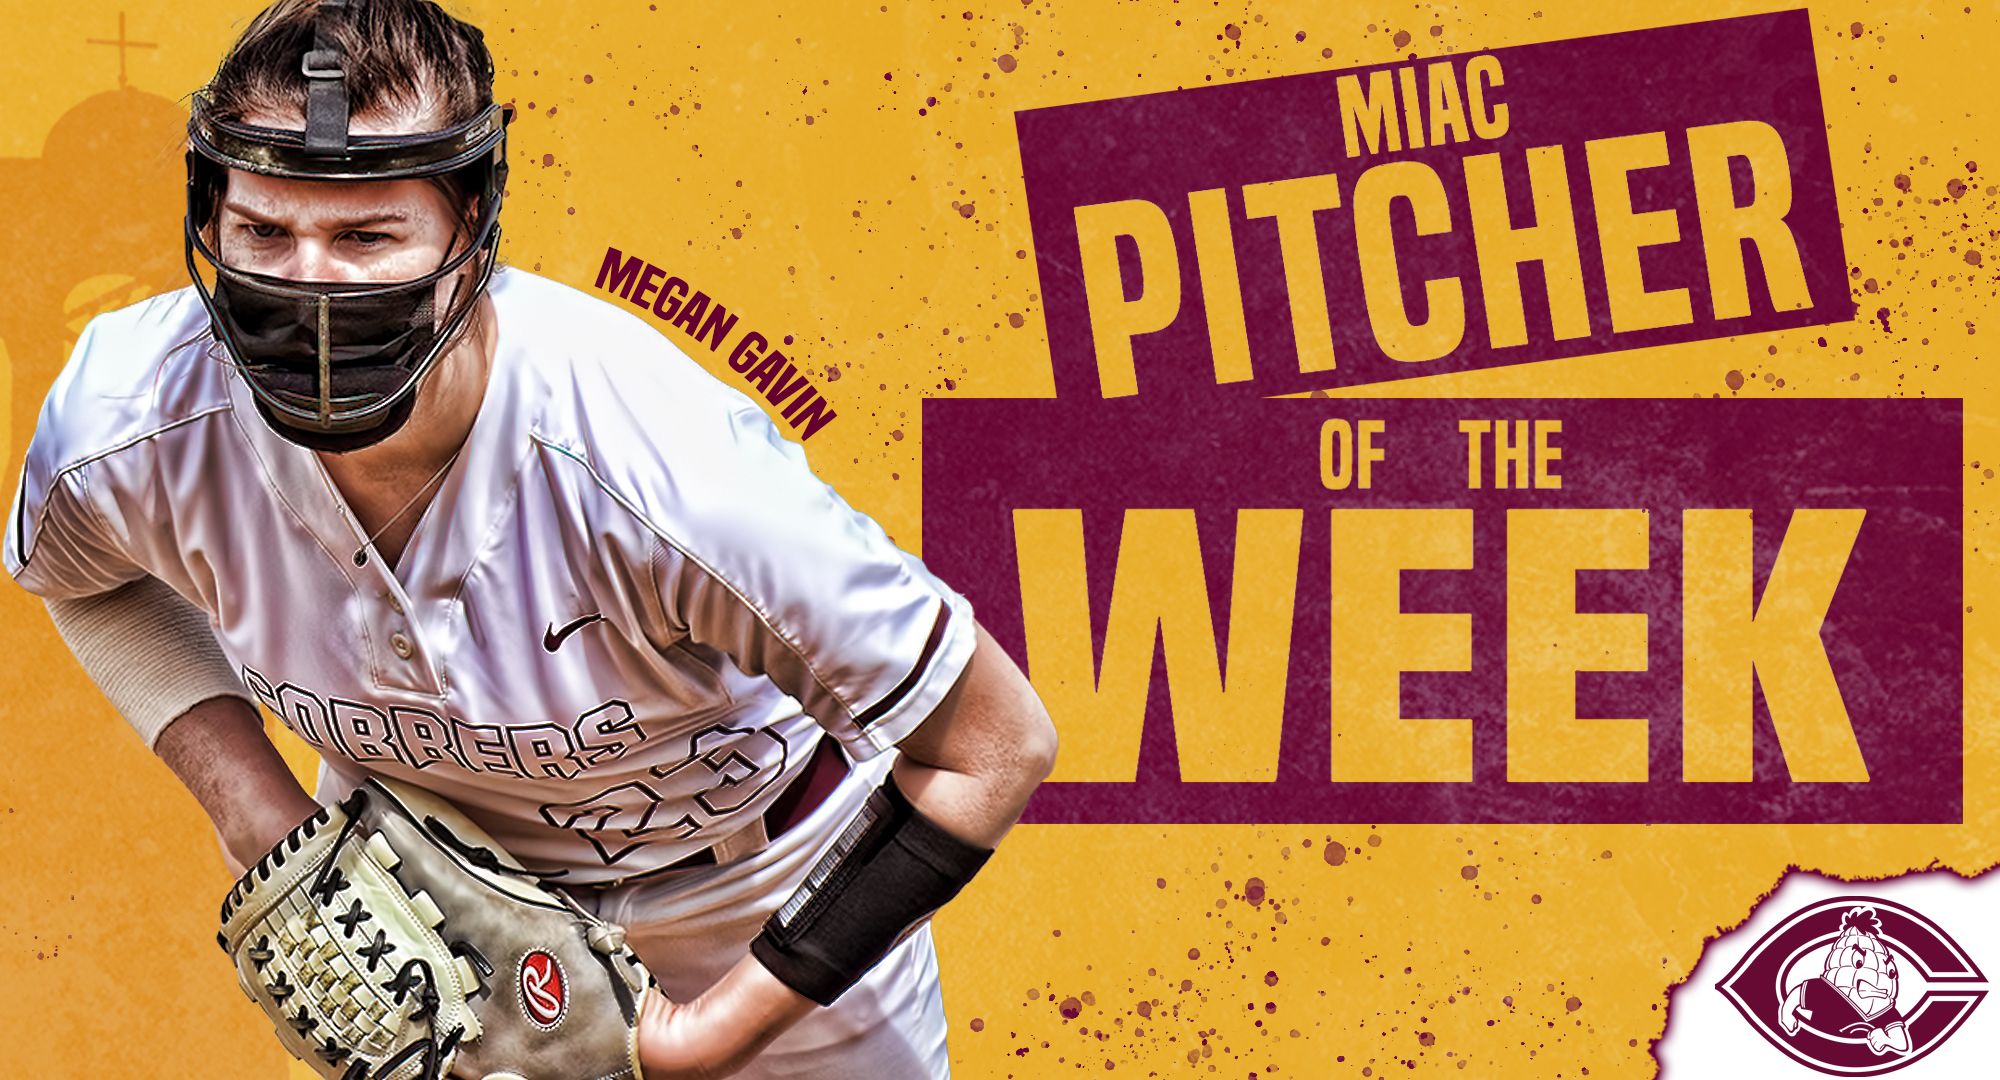 Megan Gavin was named the MIAC Pitcher of the Week after striking struck out 36 in 17.1 innings pitched last week. She didn't all an earned run and threw a 5-inning no-hitter.